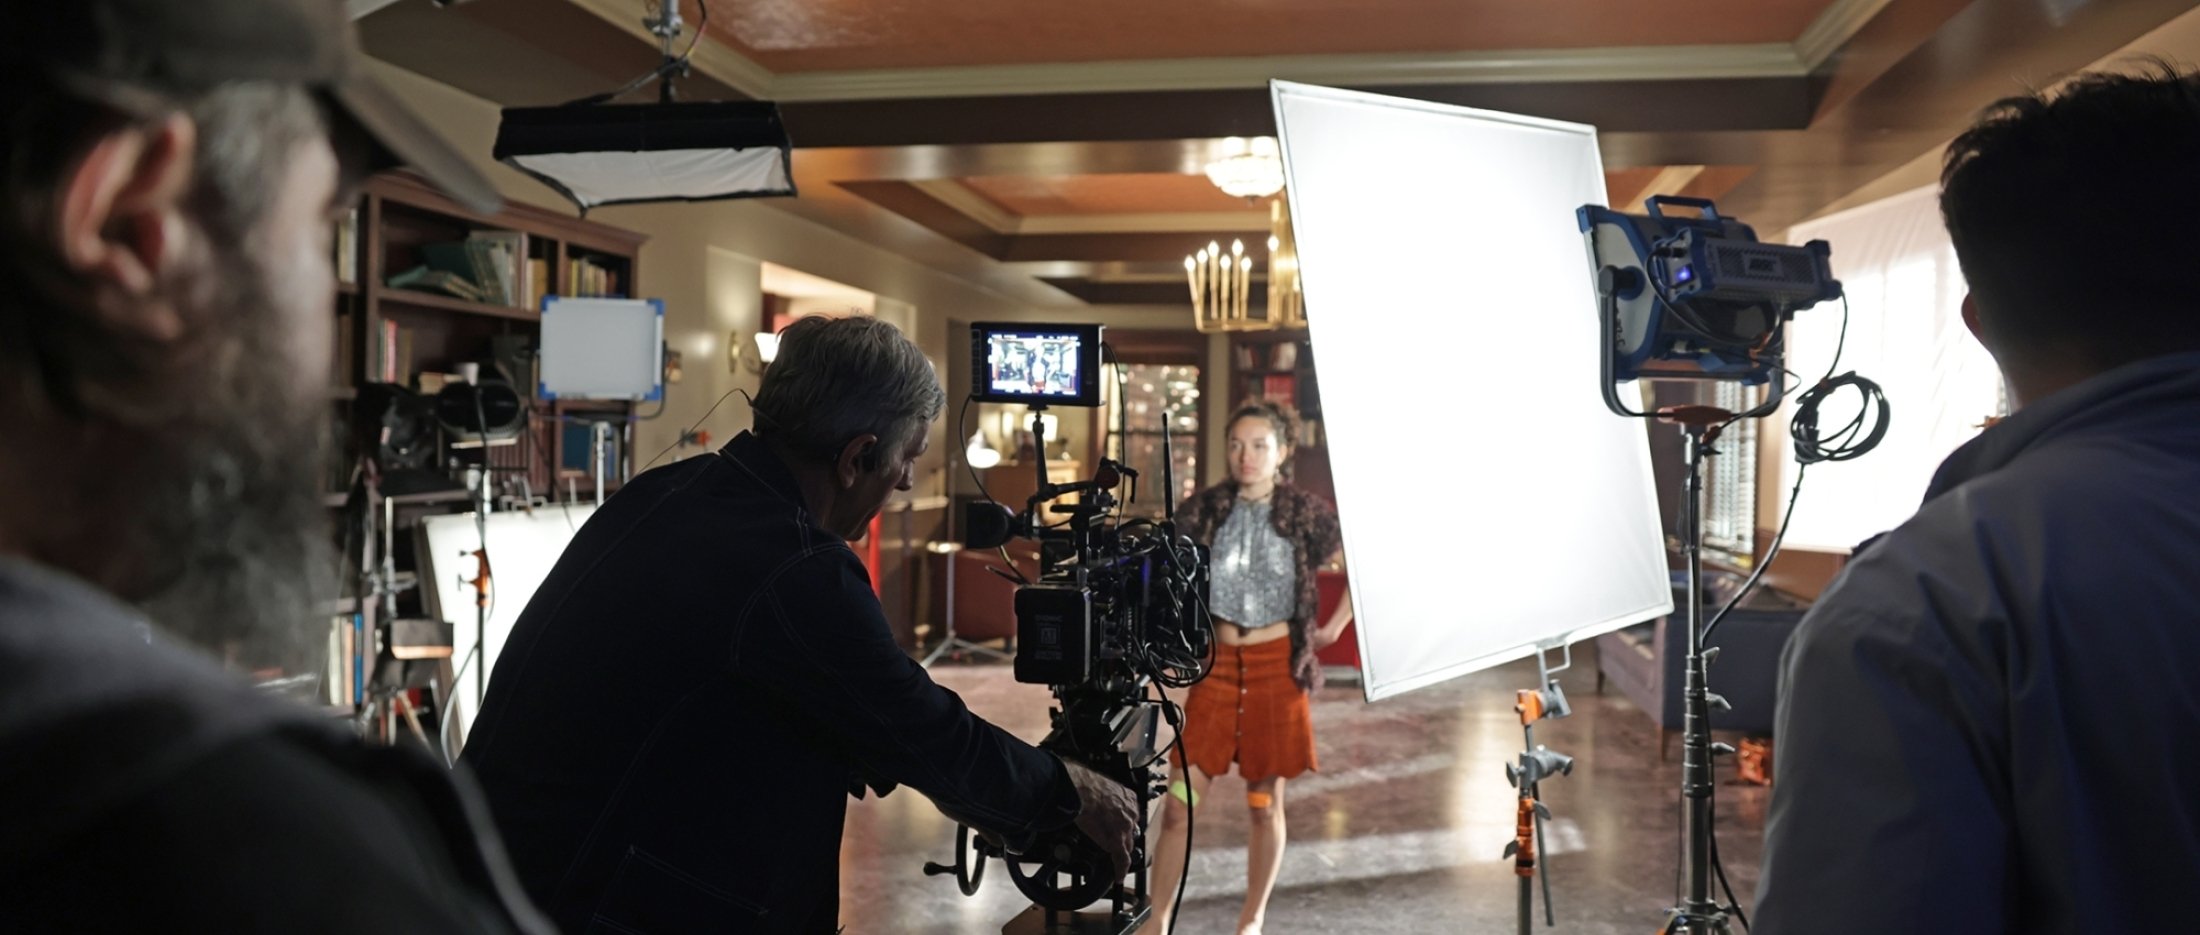 Special ASC Master Class in Toronto on May 11 Sponsored by Sony